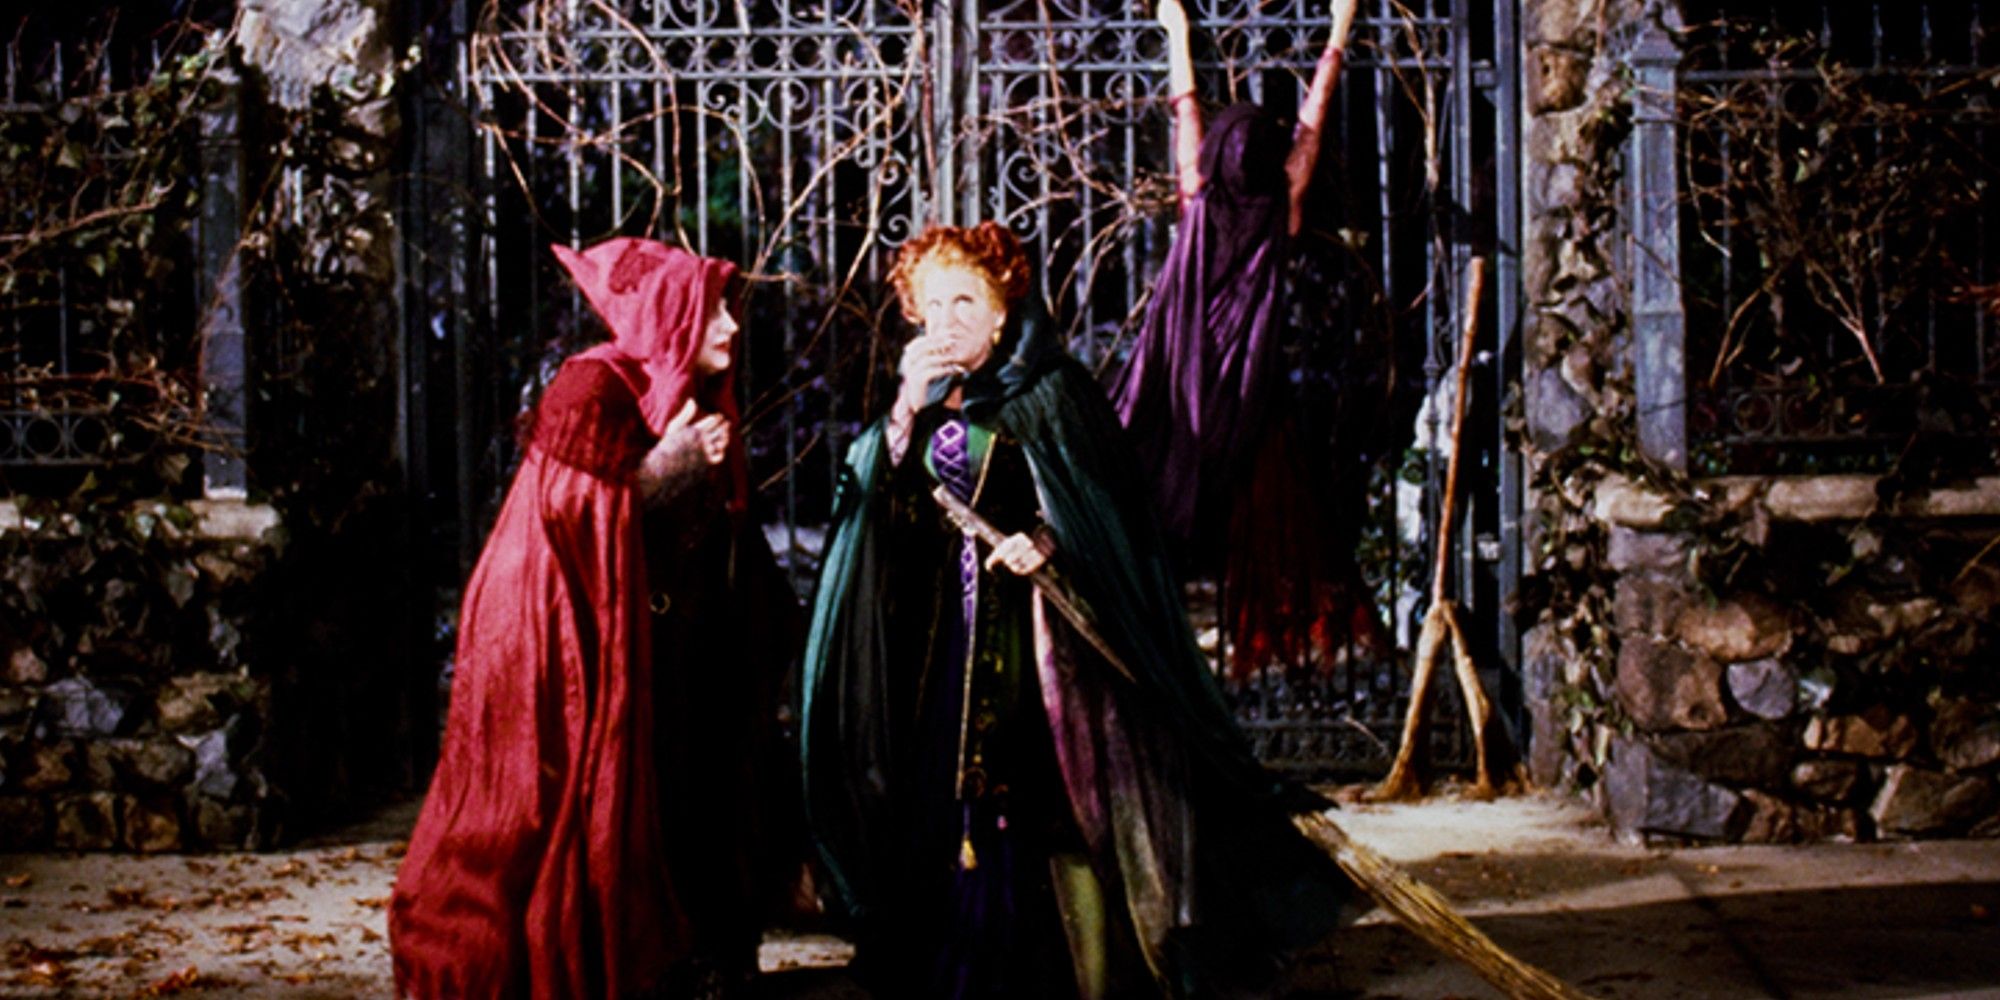 Hocus Pocus Sarah Jessica Parker Bette Midler and Kathy Najimy as Sarah Winifred and Mary Sanderson